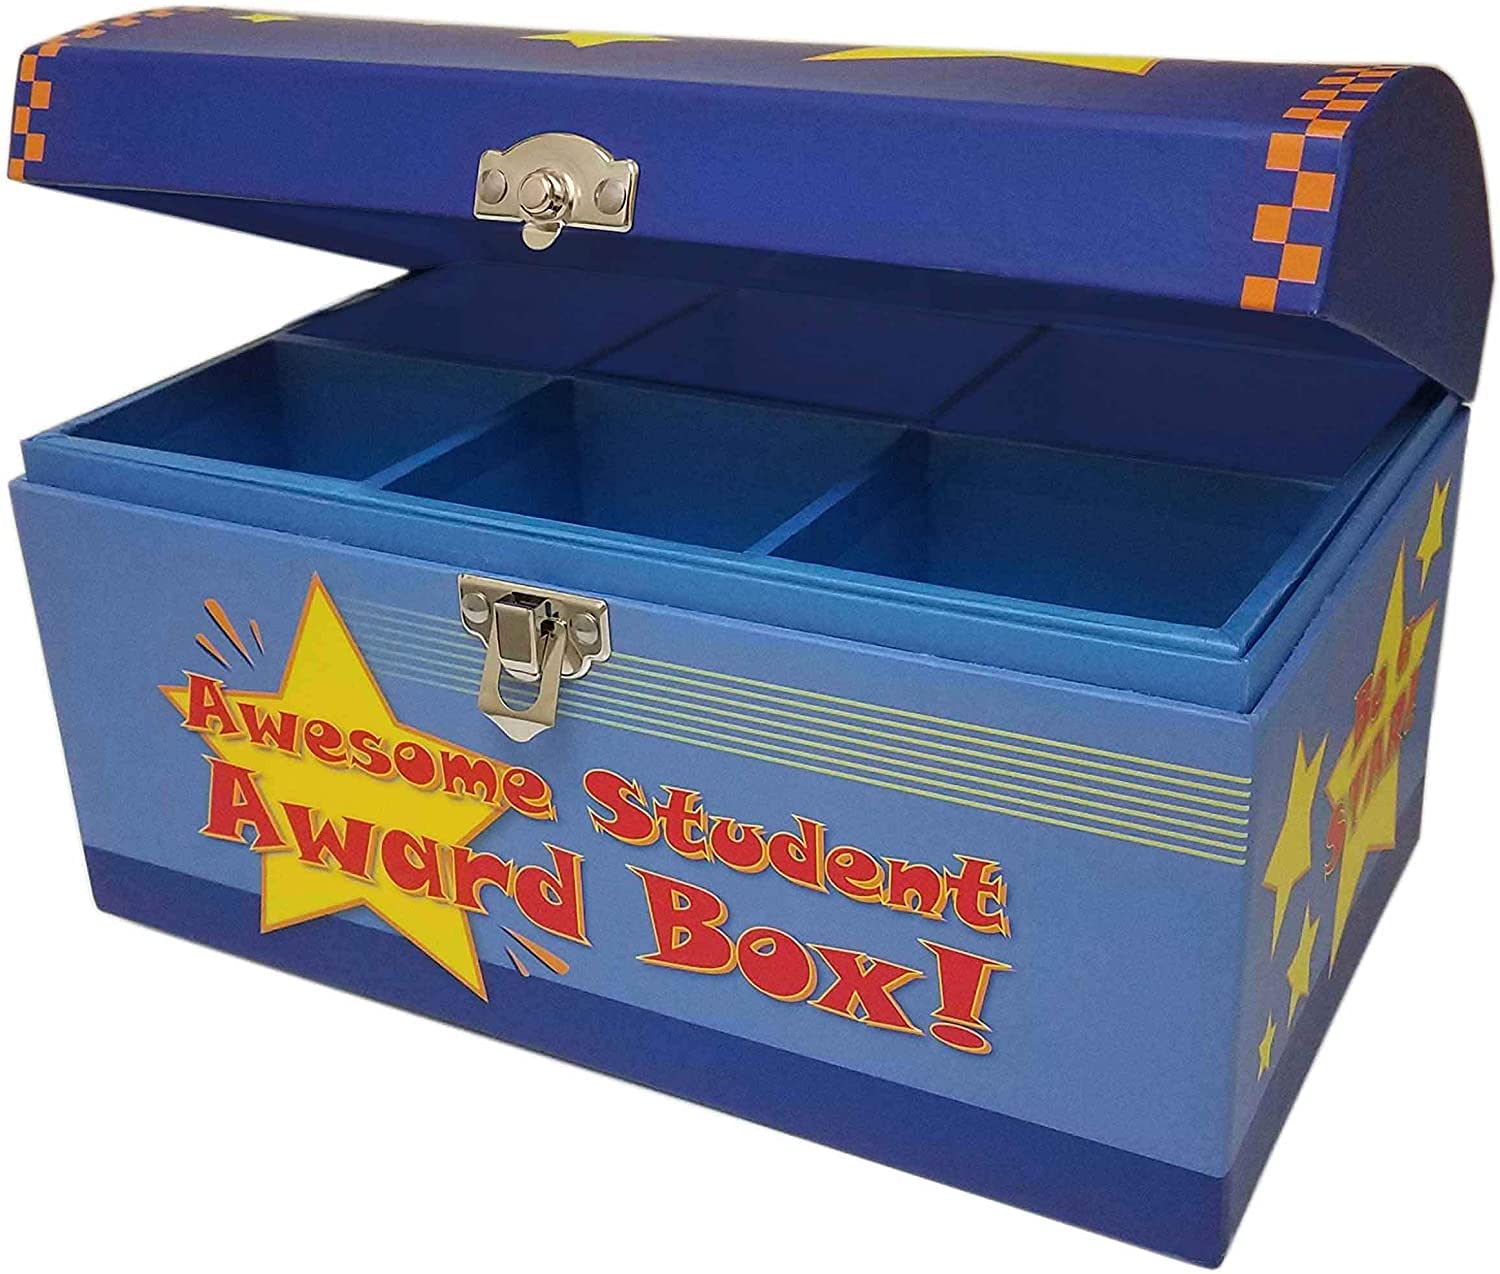 My Tiny Treasures Box Company Treasure Chest Box Desktop Size 10"x6"x6" for Teachers and Classroom Toy Prizes Awards for Star Students Prize Box